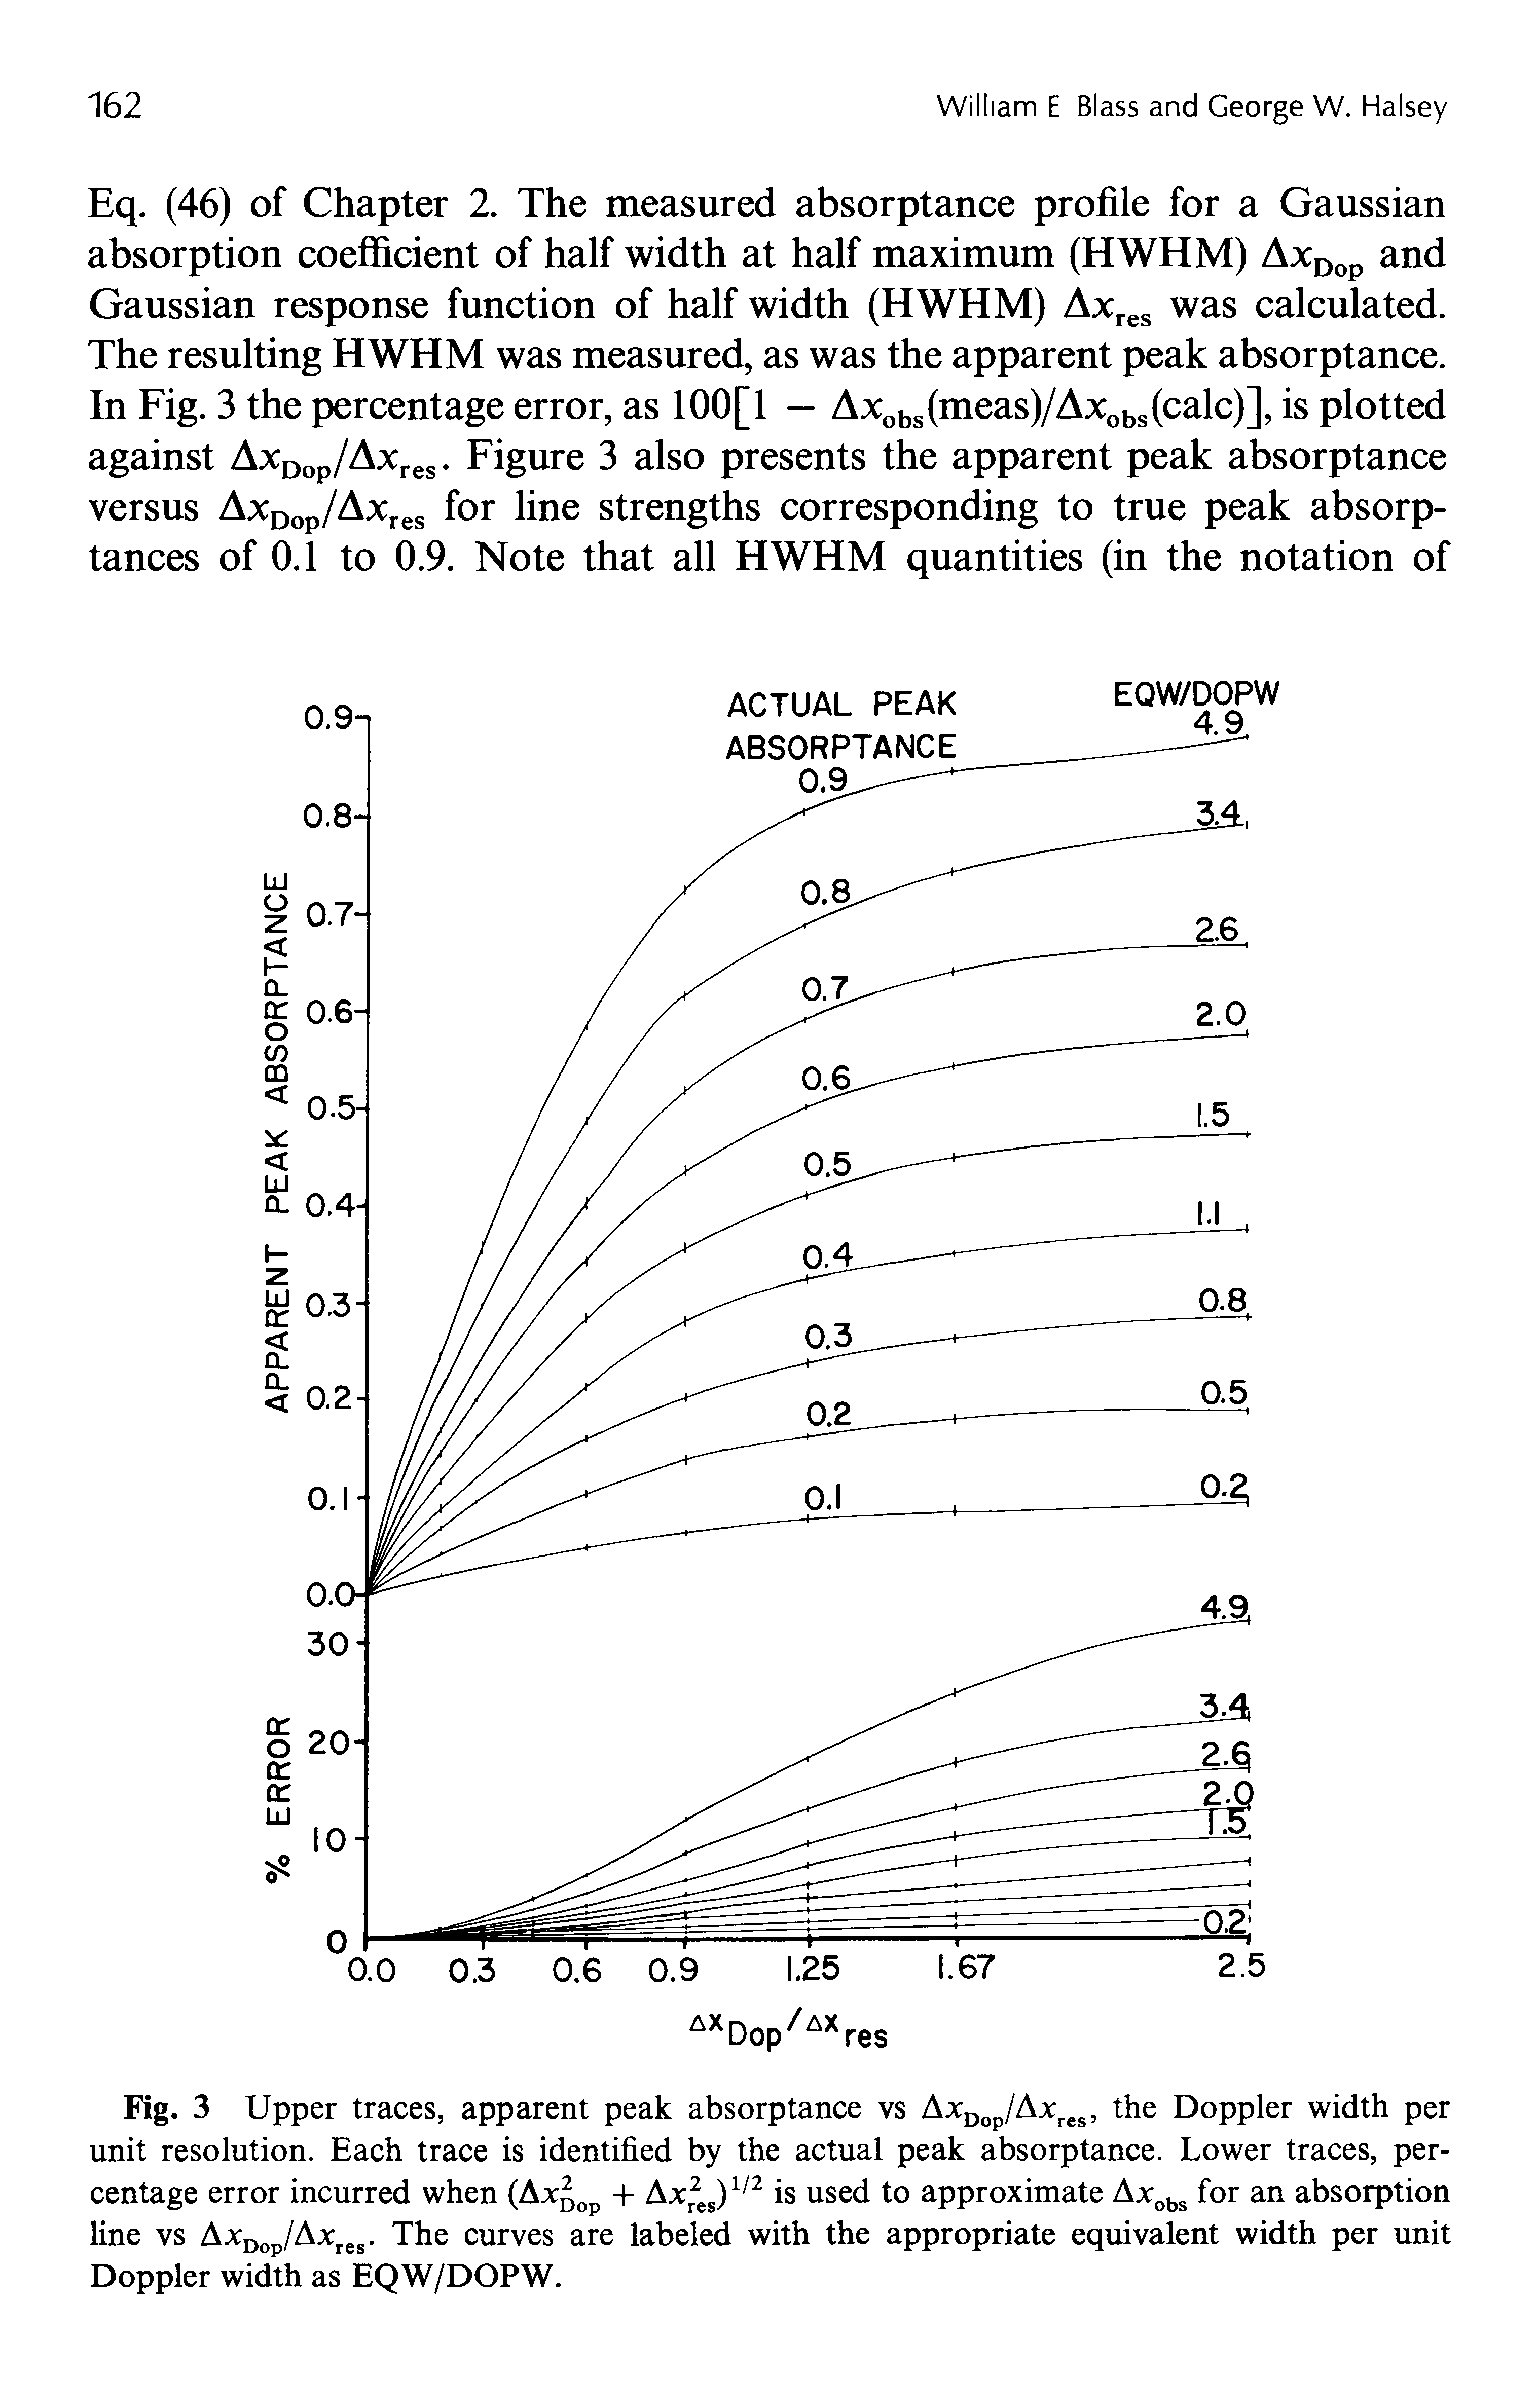 Fig. 3 Upper traces, apparent peak absorptance vs AxDop/Axres, the Doppler width per unit resolution. Each trace is identified by the actual peak absorptance. Lower traces, percentage error incurred when (Ax op + Axr2es)1/2 is used to approximate Axobs for an absorption line vs A cDop/Ajcres. The curves are labeled with the appropriate equivalent width per unit Doppler width as EQW/DOPW.